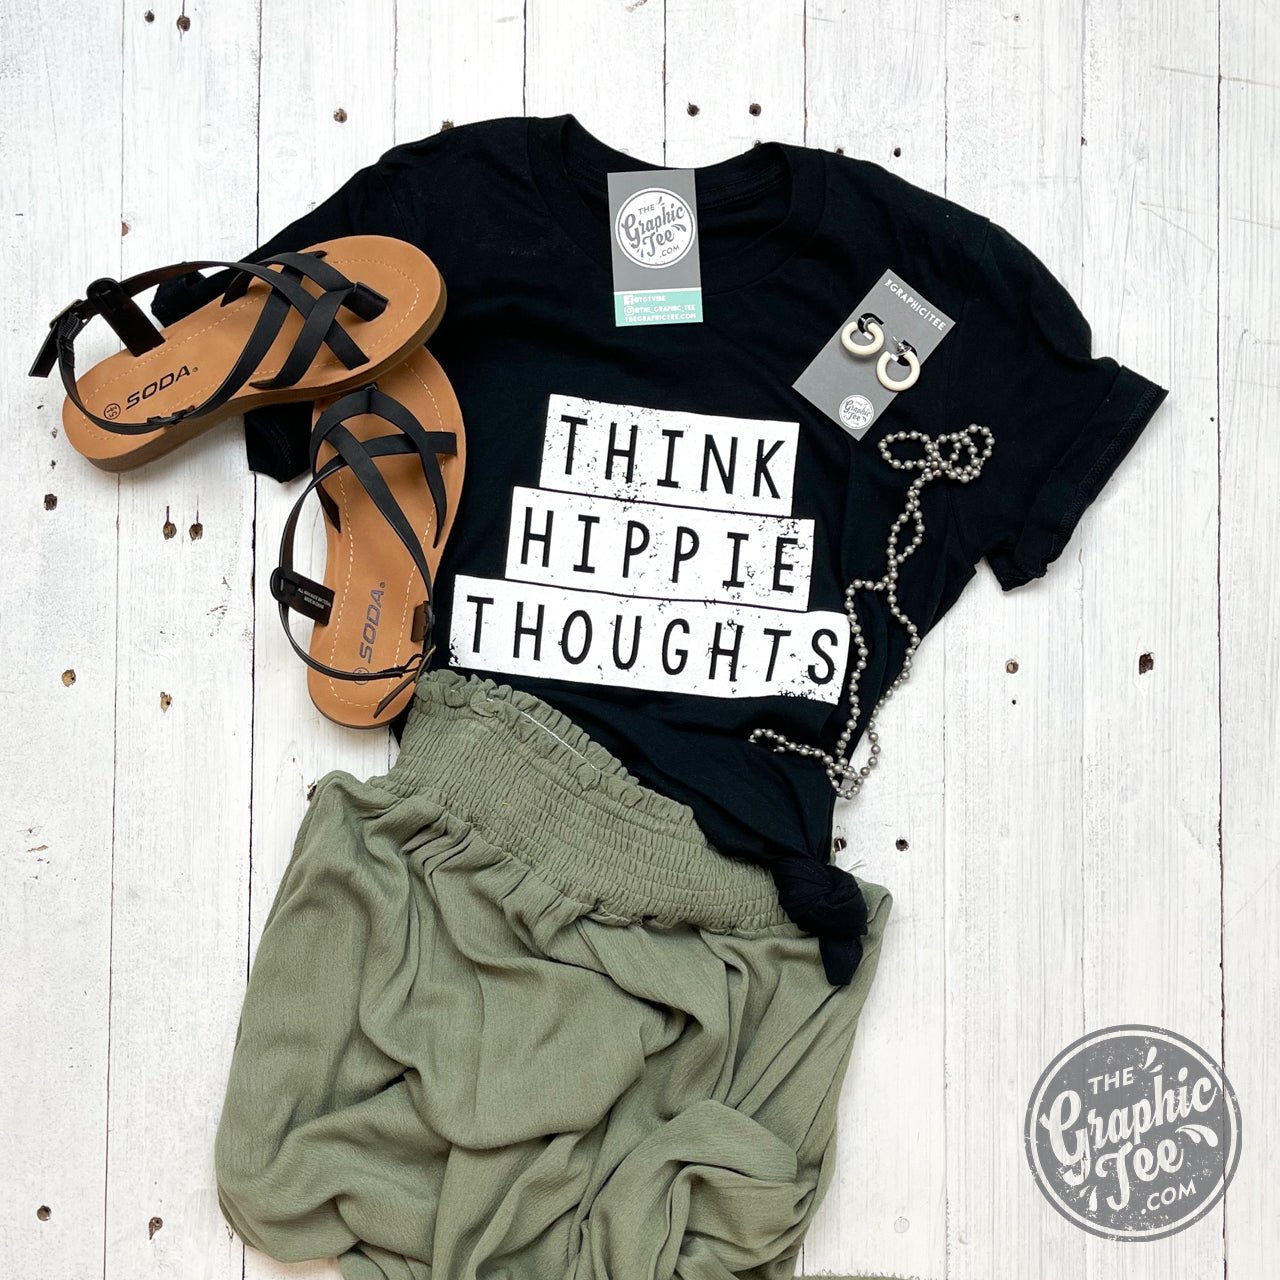 Think Hippie Thoughts - Unisex Tee - The Graphic Tee